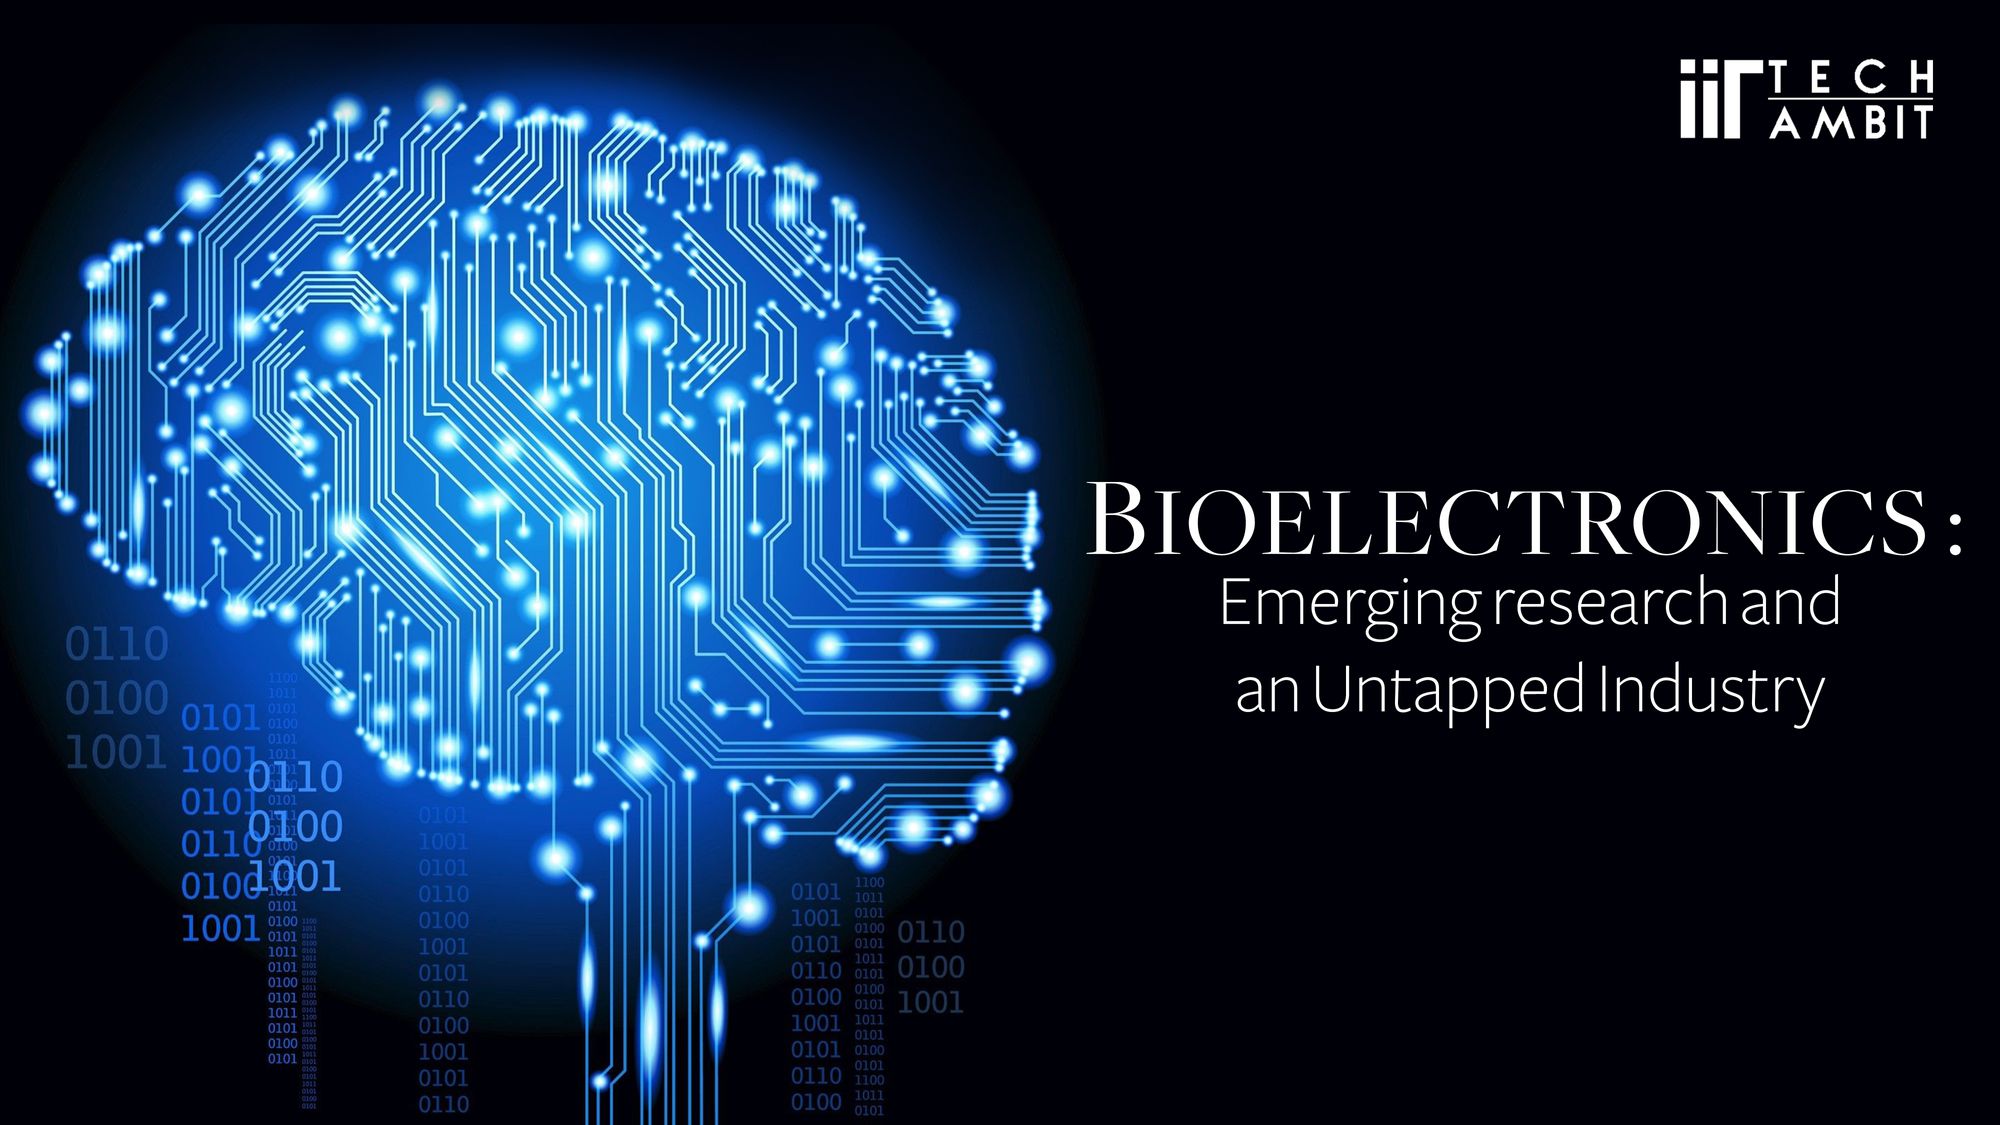 Bioelectronics: Emerging research and an Untapped Industry